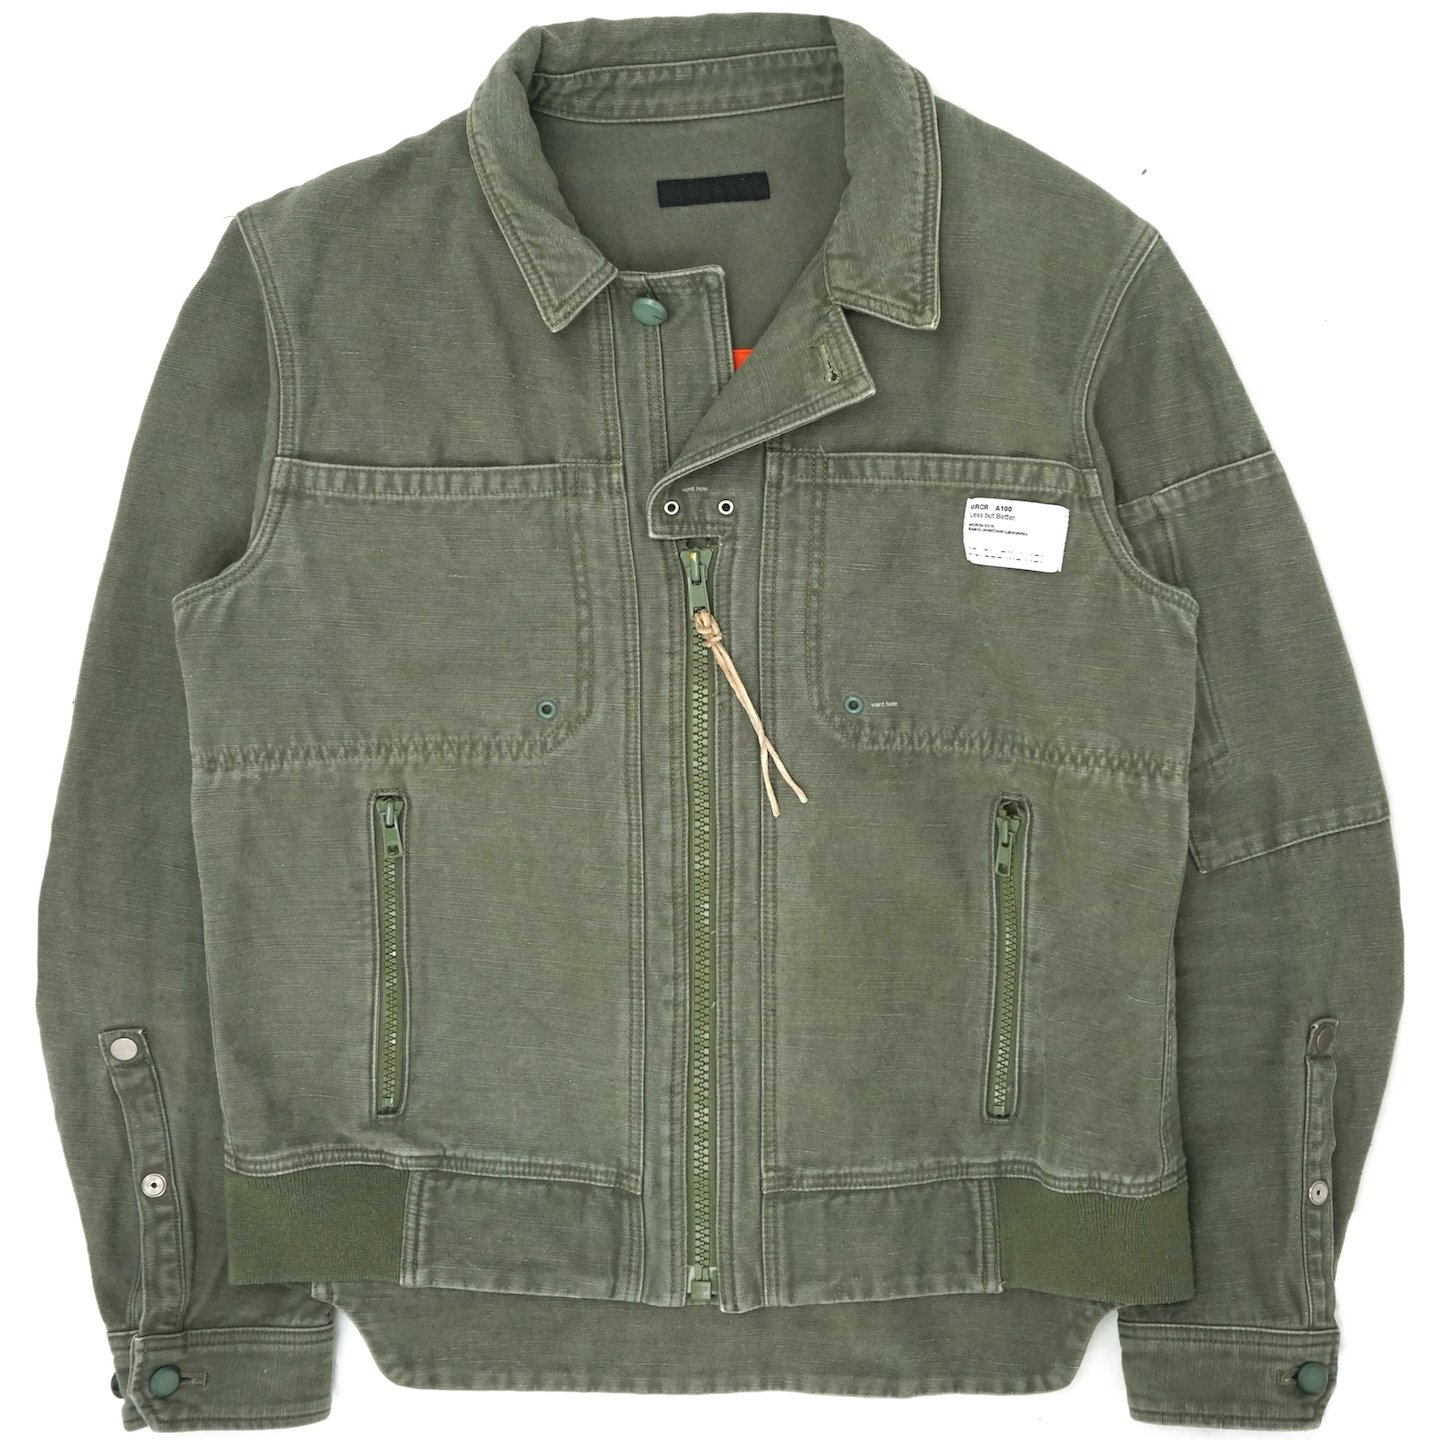 Undercover SS2010 “Less But Better” Tactical Rider Jacket — DENIMGLASSES